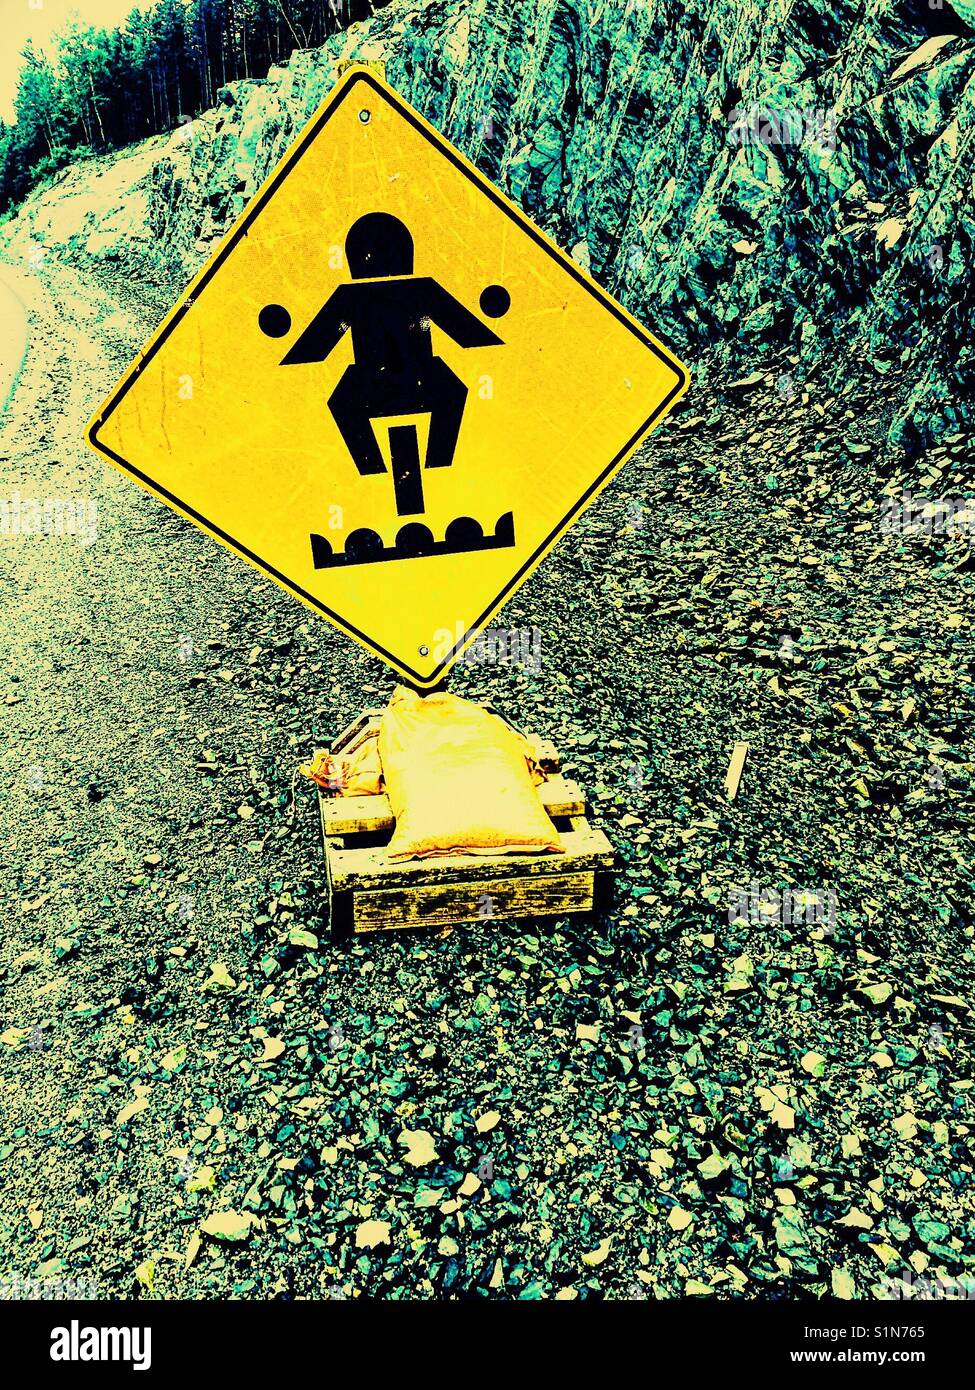 Bumpy road ahead warning sign for motorcyclists, Canada Stock Photo